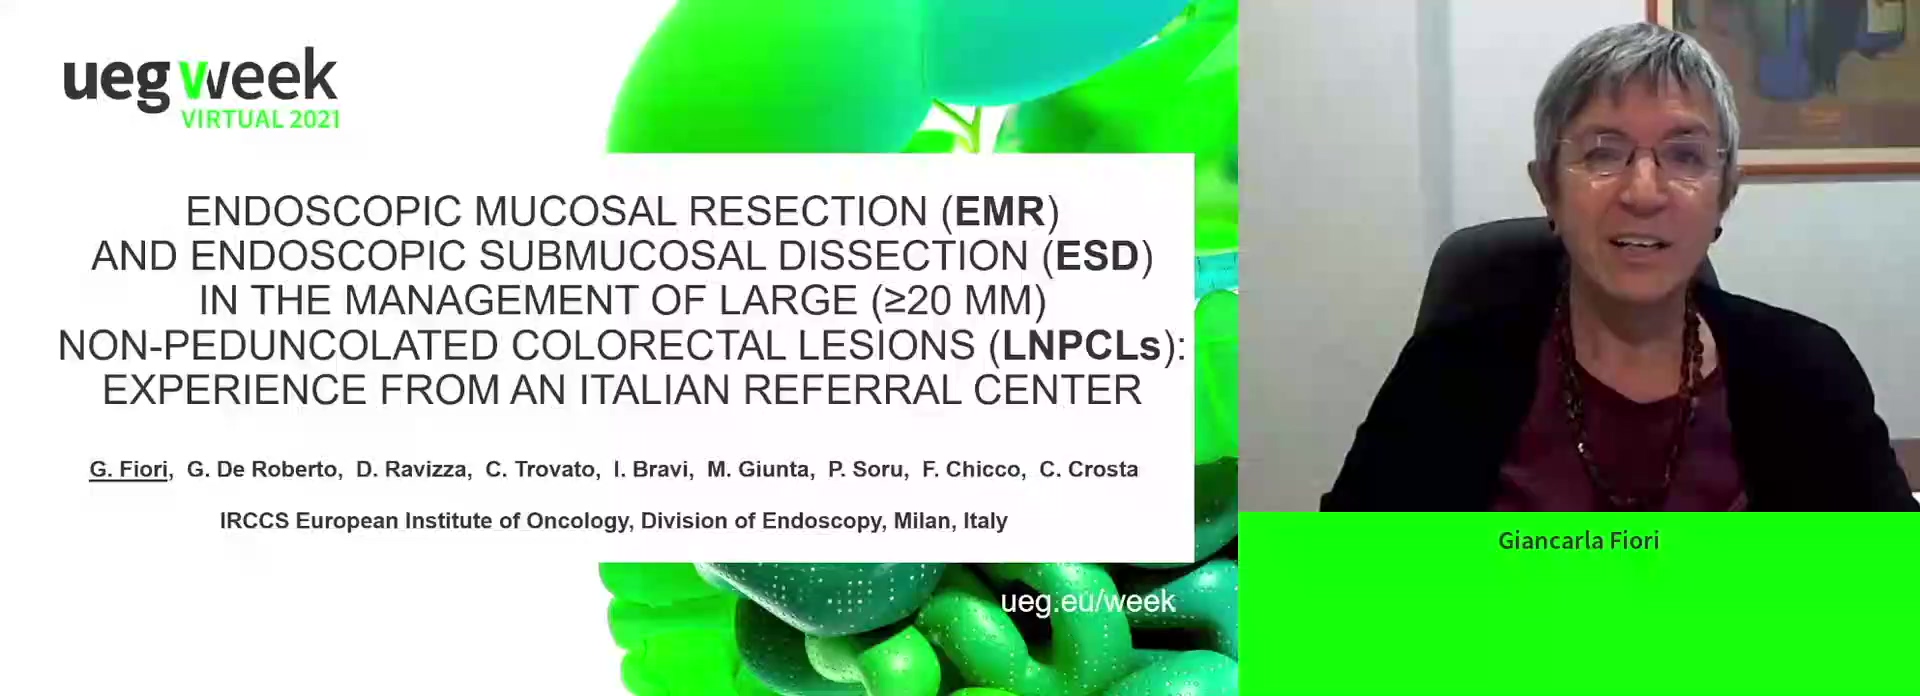 ENDOSCOPIC MUCOSAL RESECTION (EMR) AND ENDOSCOPIC SUBMUCOSAL DISSECTION (ESD) IN THE MANAGEMENT OF LARGE (>=20 MM) NON-PEDUNCOLATE COLORECTAL LESIONS (LNPCLS): EXPERIENCE FROM AN ITALIAN REFERRAL CENTER